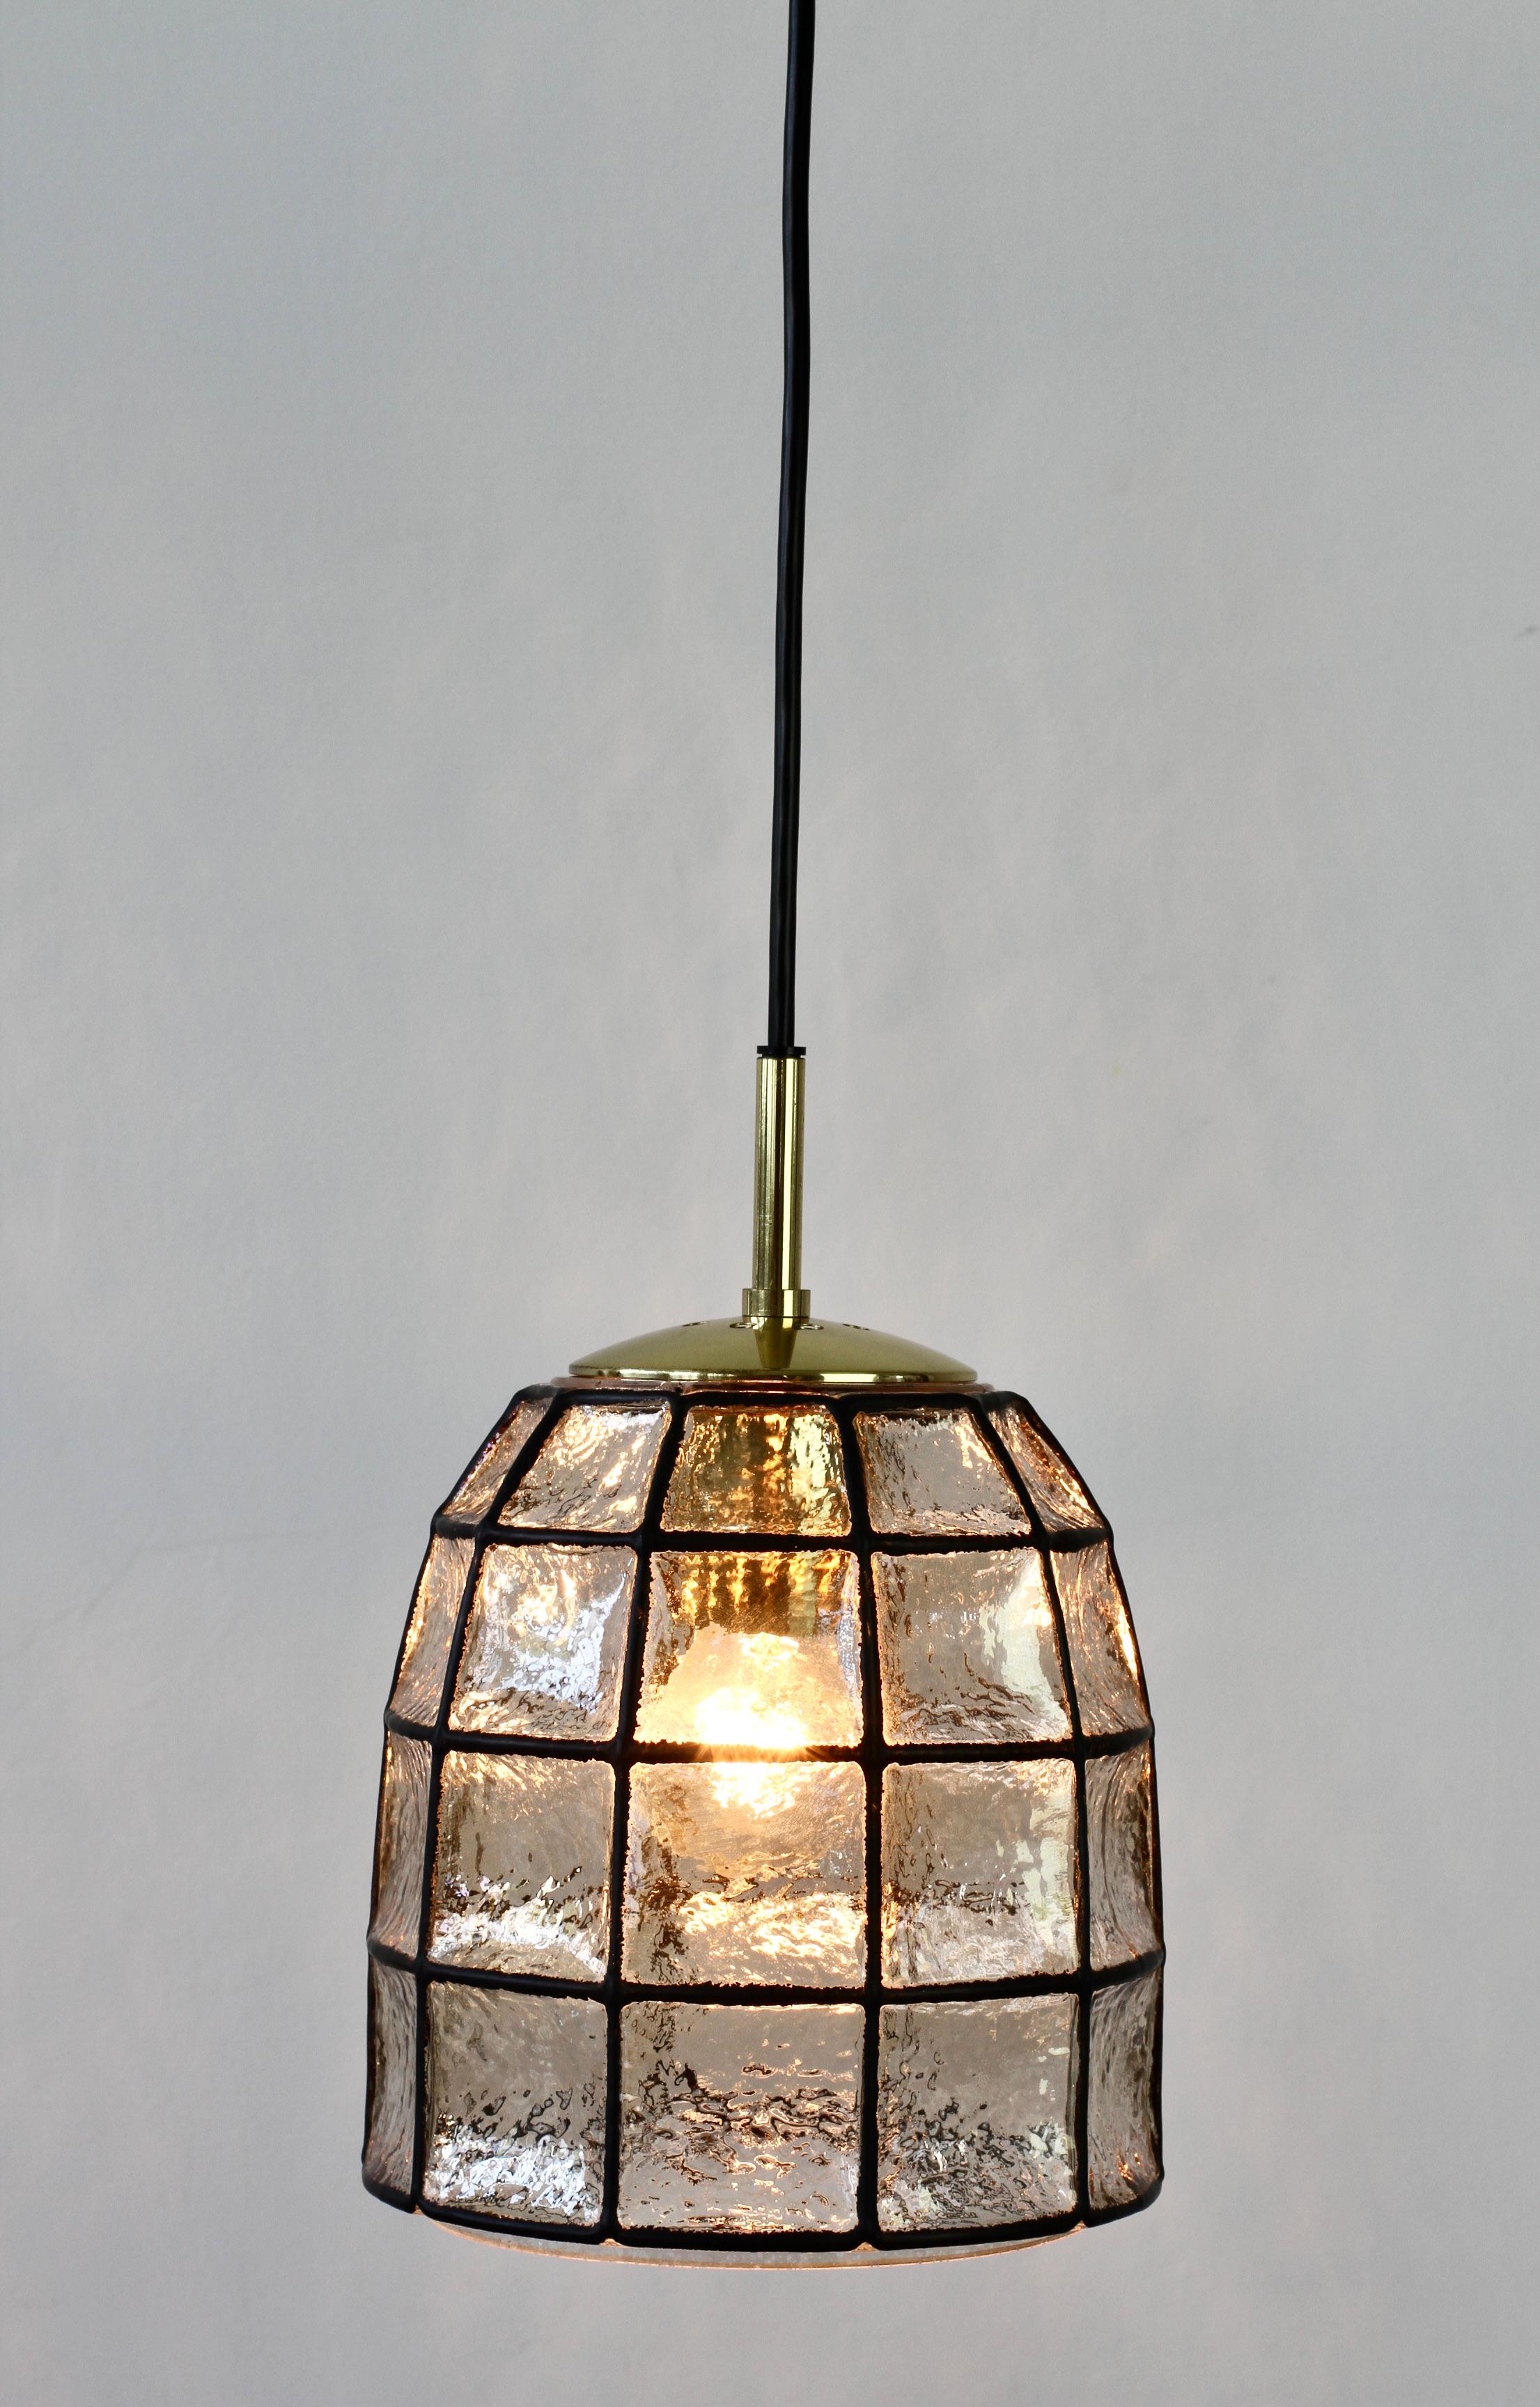 Molded Limburg Mid-Century Vintage Glass and Brass Bell Pendant Light / Lamp, 1960s For Sale